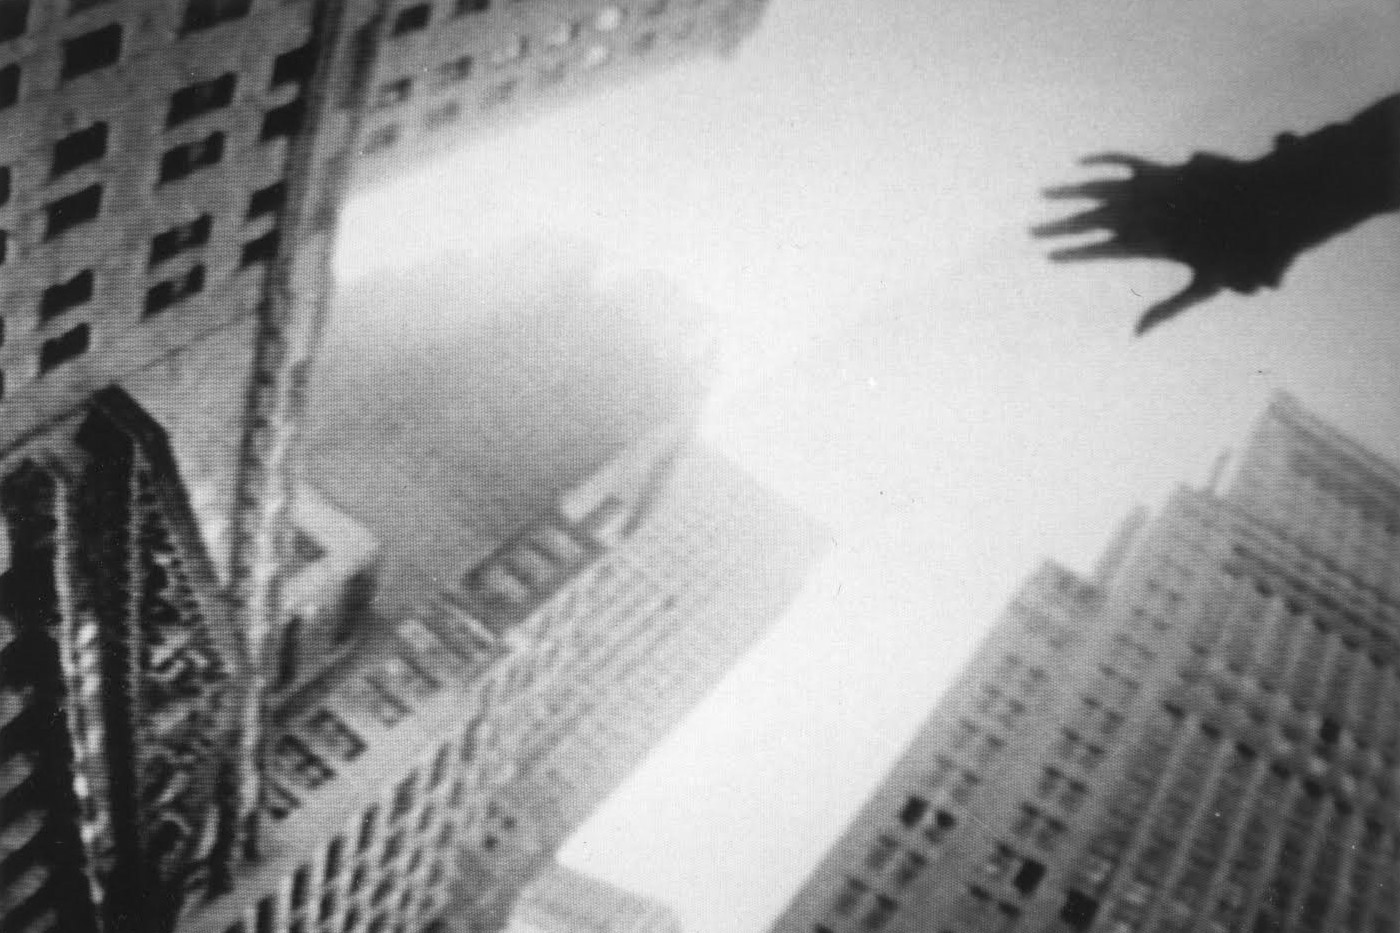 Jem Cohen, film still from This Is a History of New York, 1987